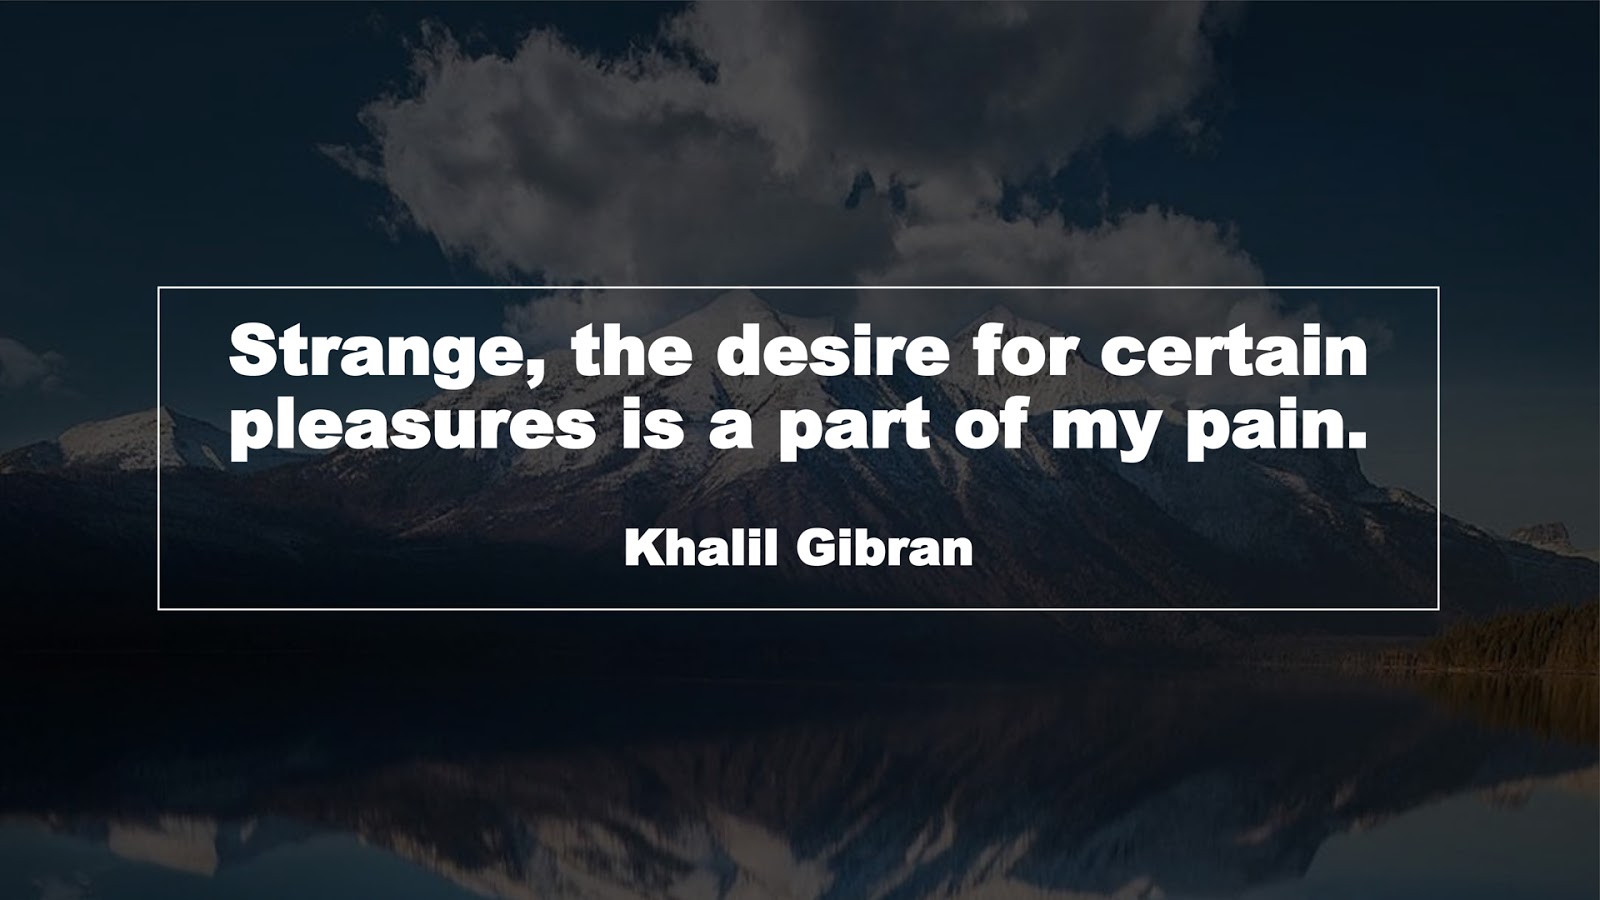 Strange, the desire for certain pleasures is a part of my pain. (Khalil Gibran)